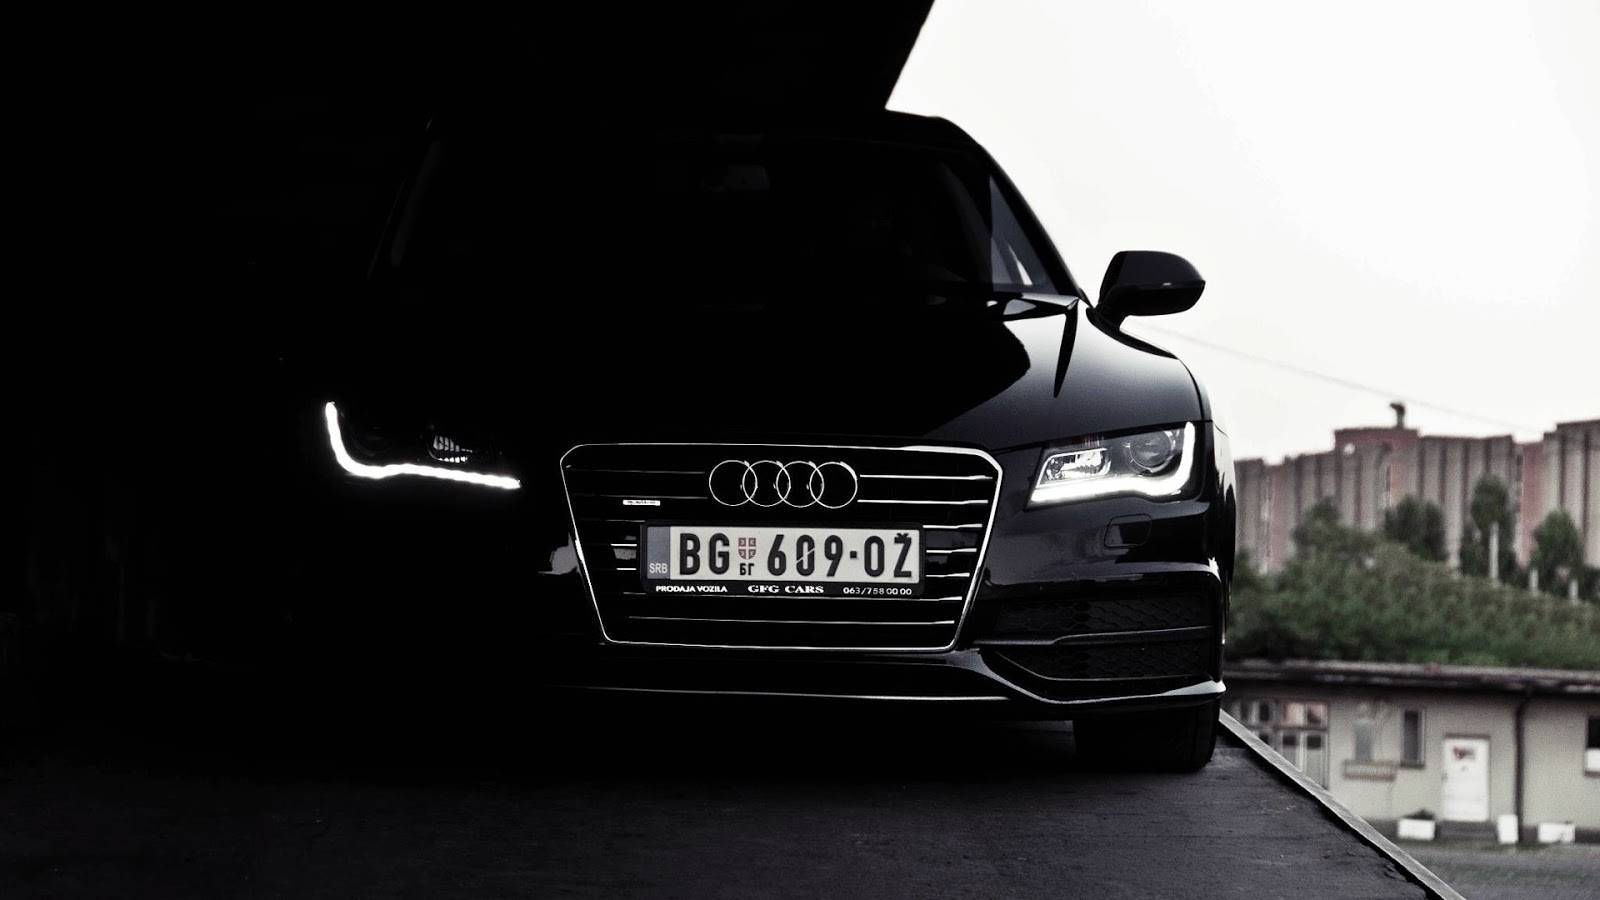 Audi Images Audi A4 Hd Wallpaper And Background Photos - Audi A7 Wallpaper Hd , HD Wallpaper & Backgrounds